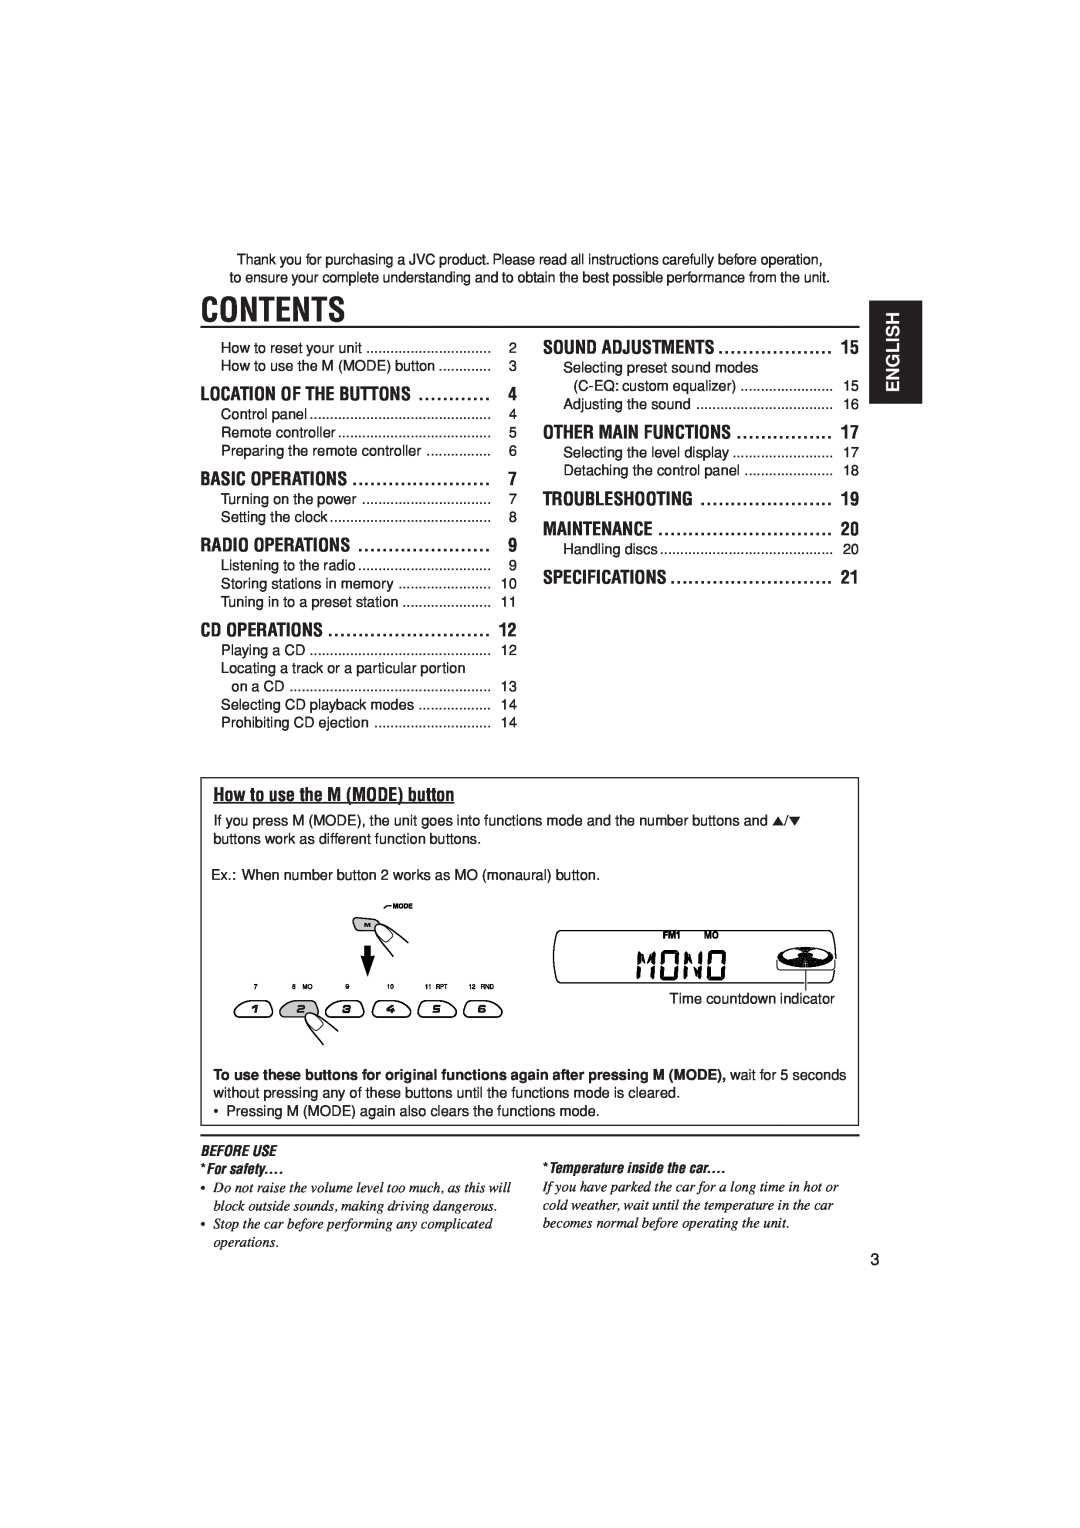 JVC KD-S20 manual Contents, Maintenance, How to use the M MODE button, English 